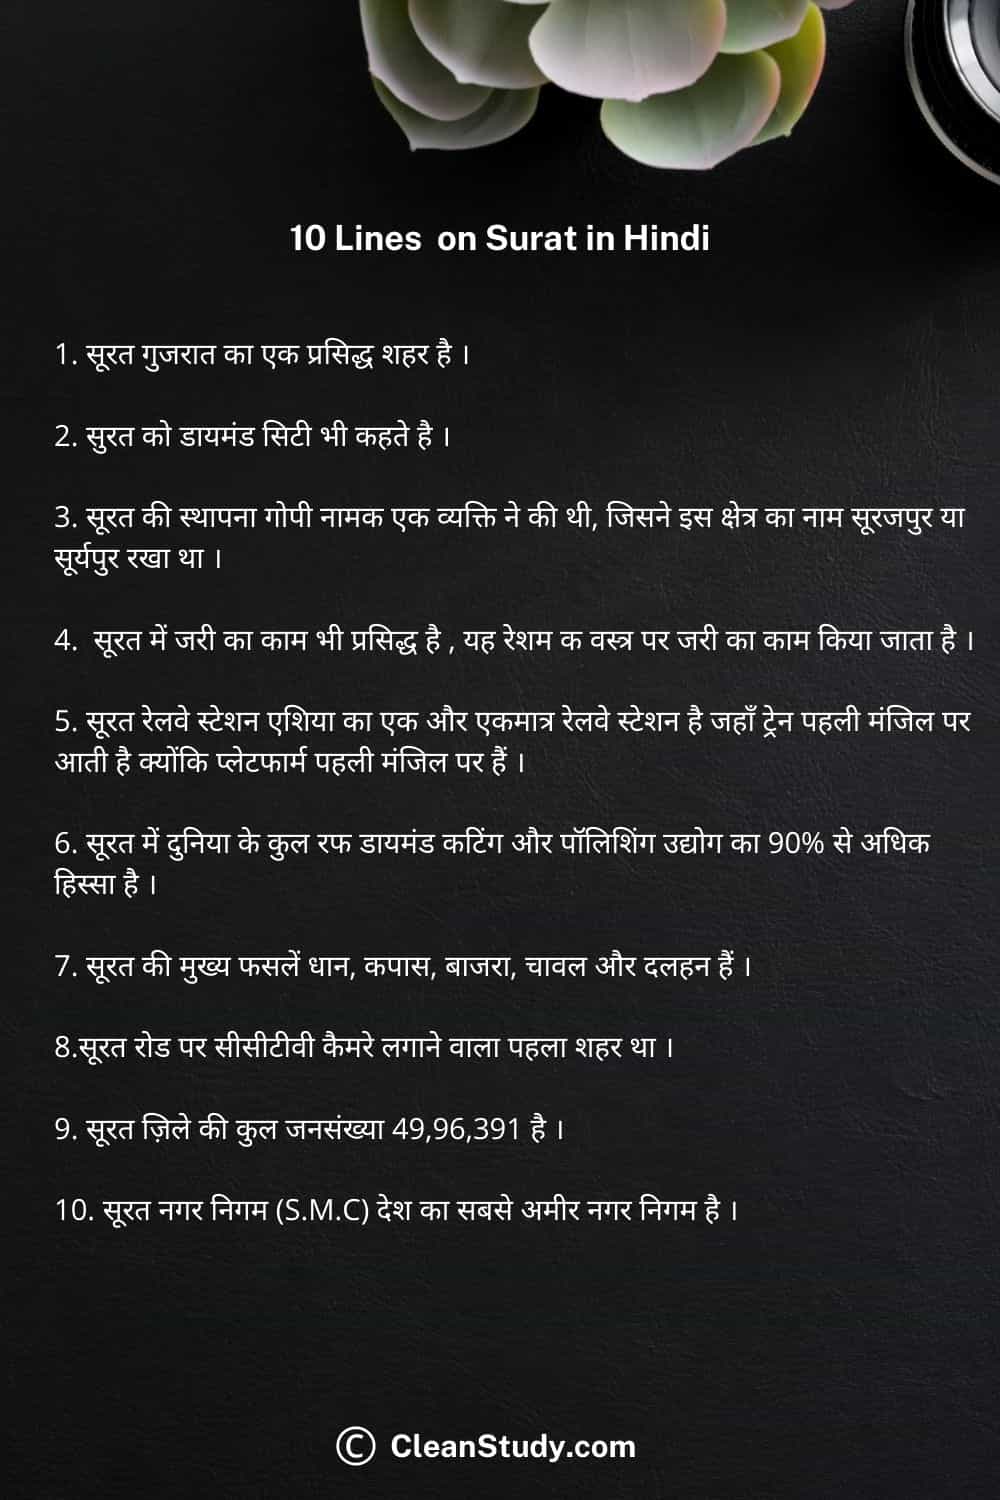 10 lines on surat in hindi